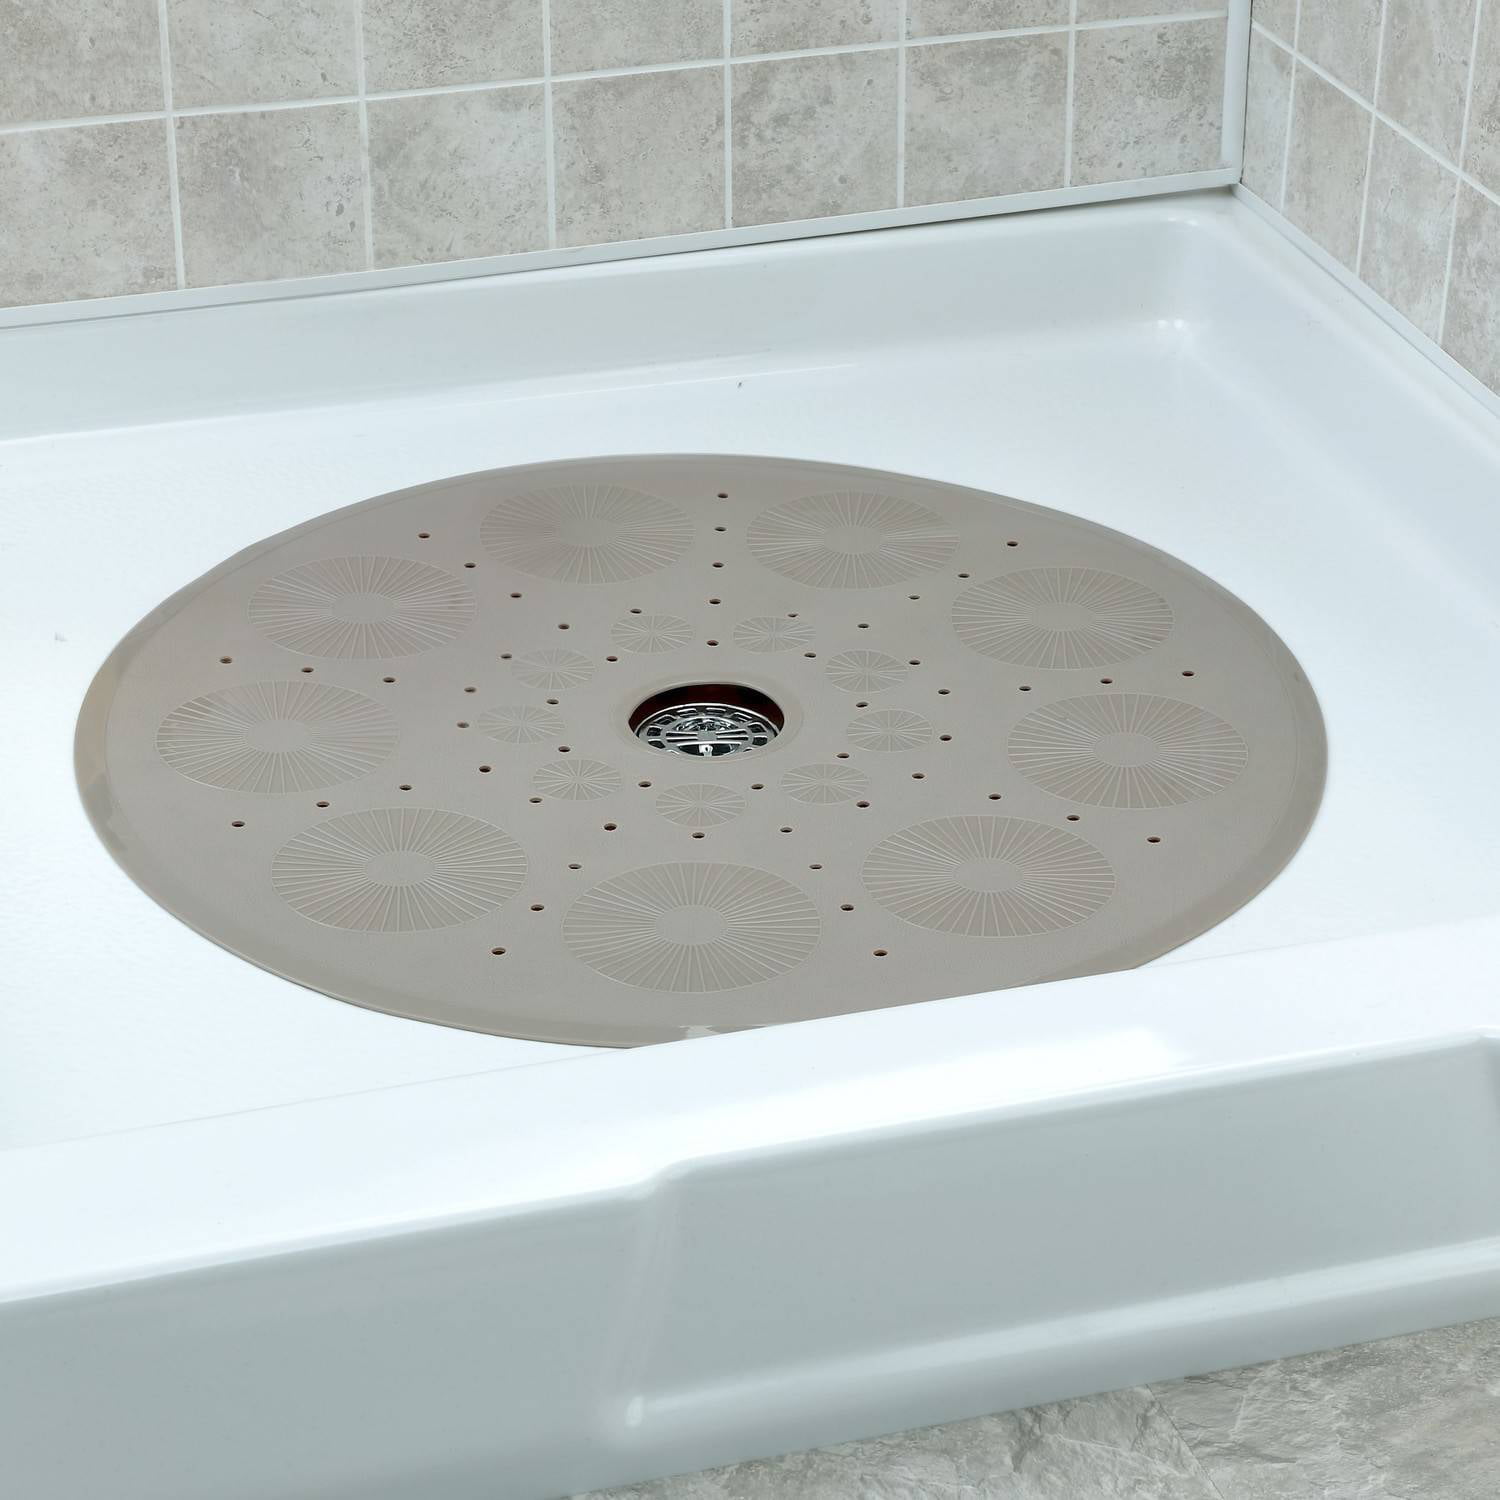 Gray Bathroom Shower Stall Mats Foot Massage Non-Slip mat 21.6 x 21.6 Textured Surface Round Non Slip Shower Mat Anti Slip Bath Mats with Drain Hole in Middle with Strong Rubber Suction Cups